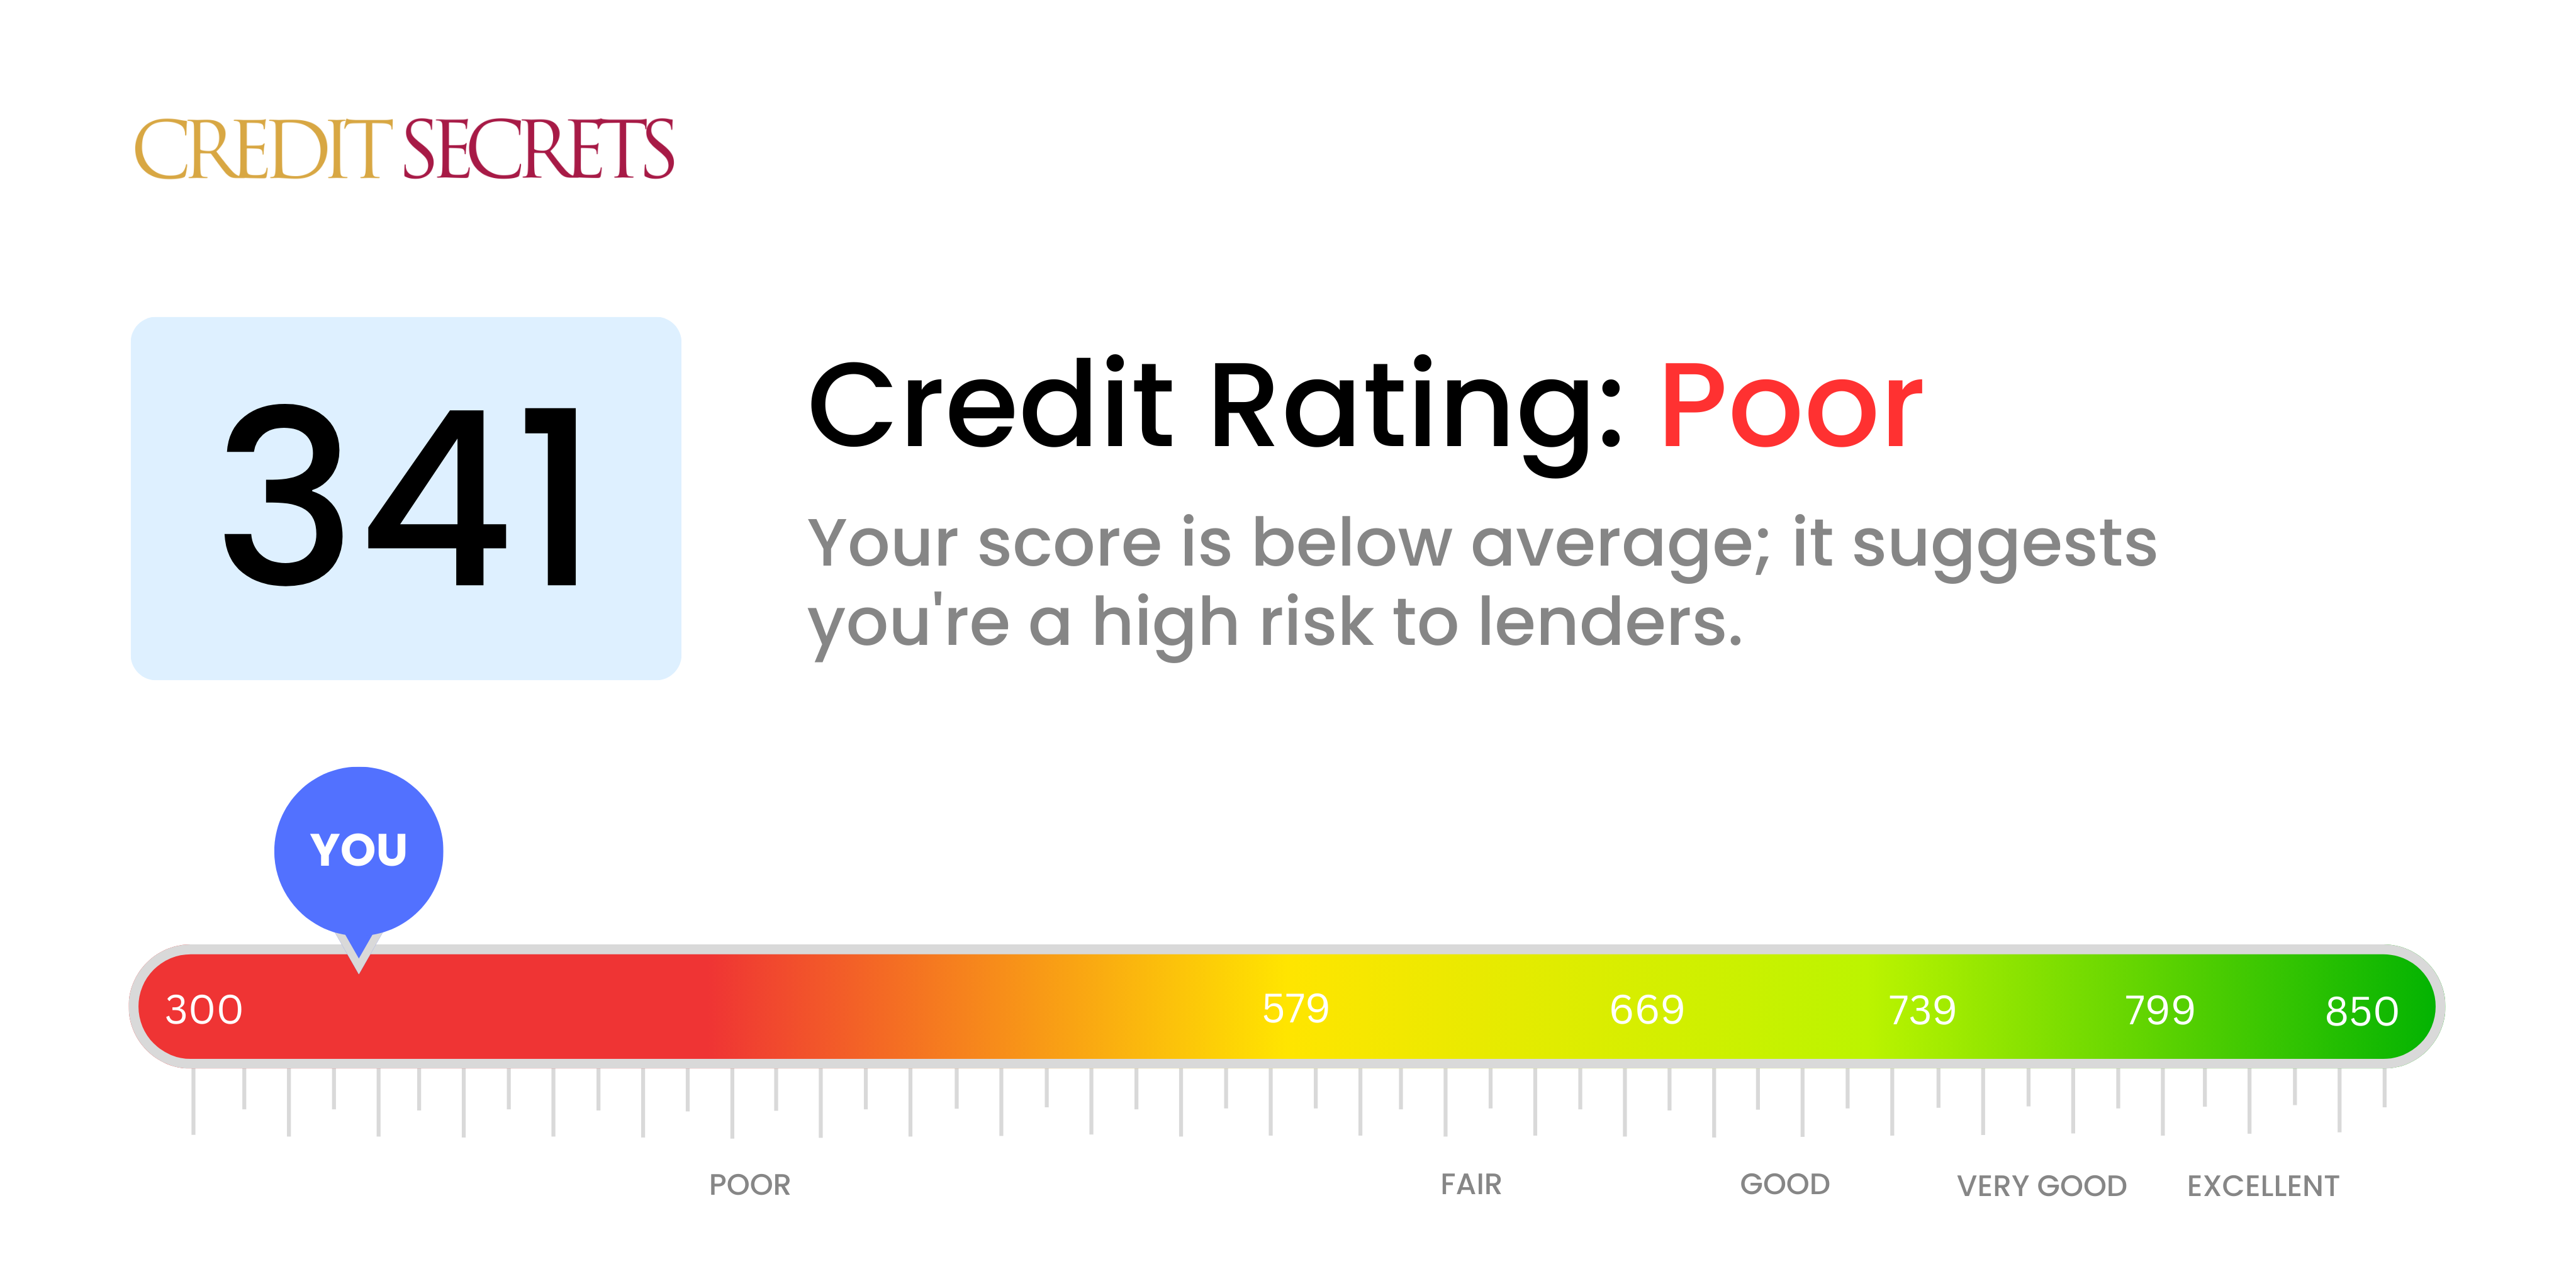 Is 341 a good credit score?